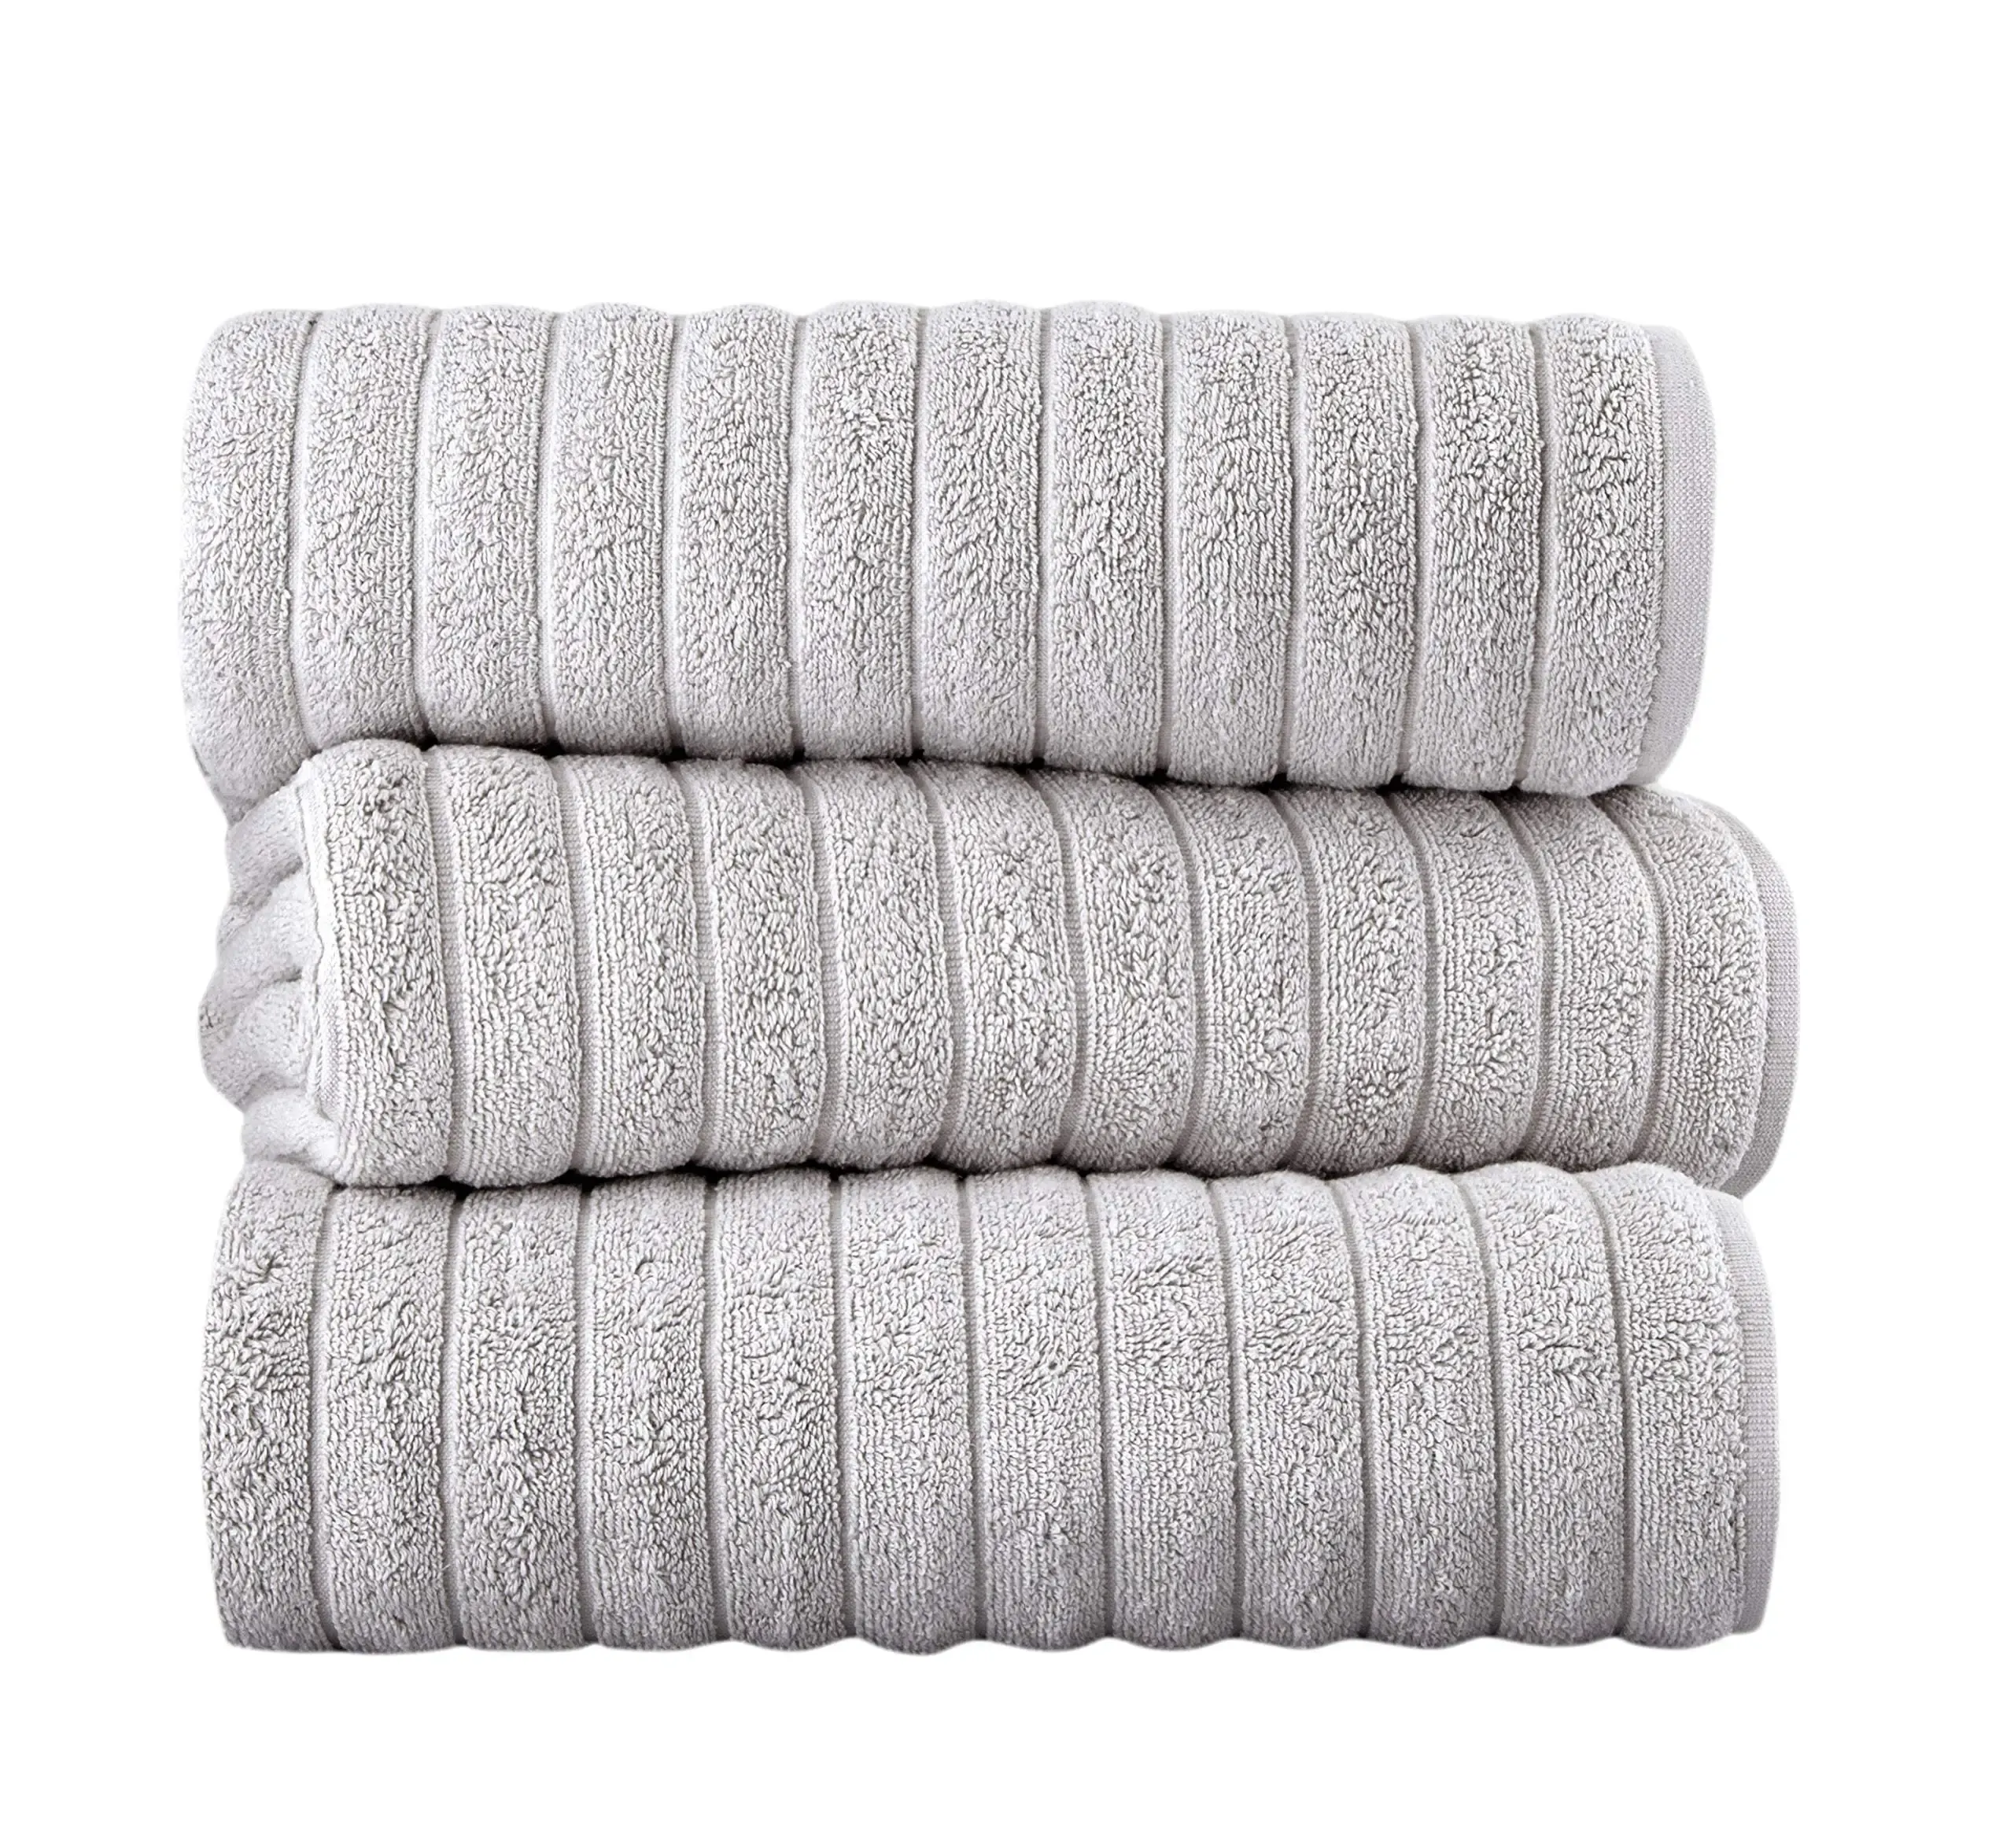 Towels Classic Turkish Towel, Extra Large, Premium Cotton Bath,Thick and Absorbent,QuickDry,Ribbed, Luxury Bathroom Towels, 27x55 Inch